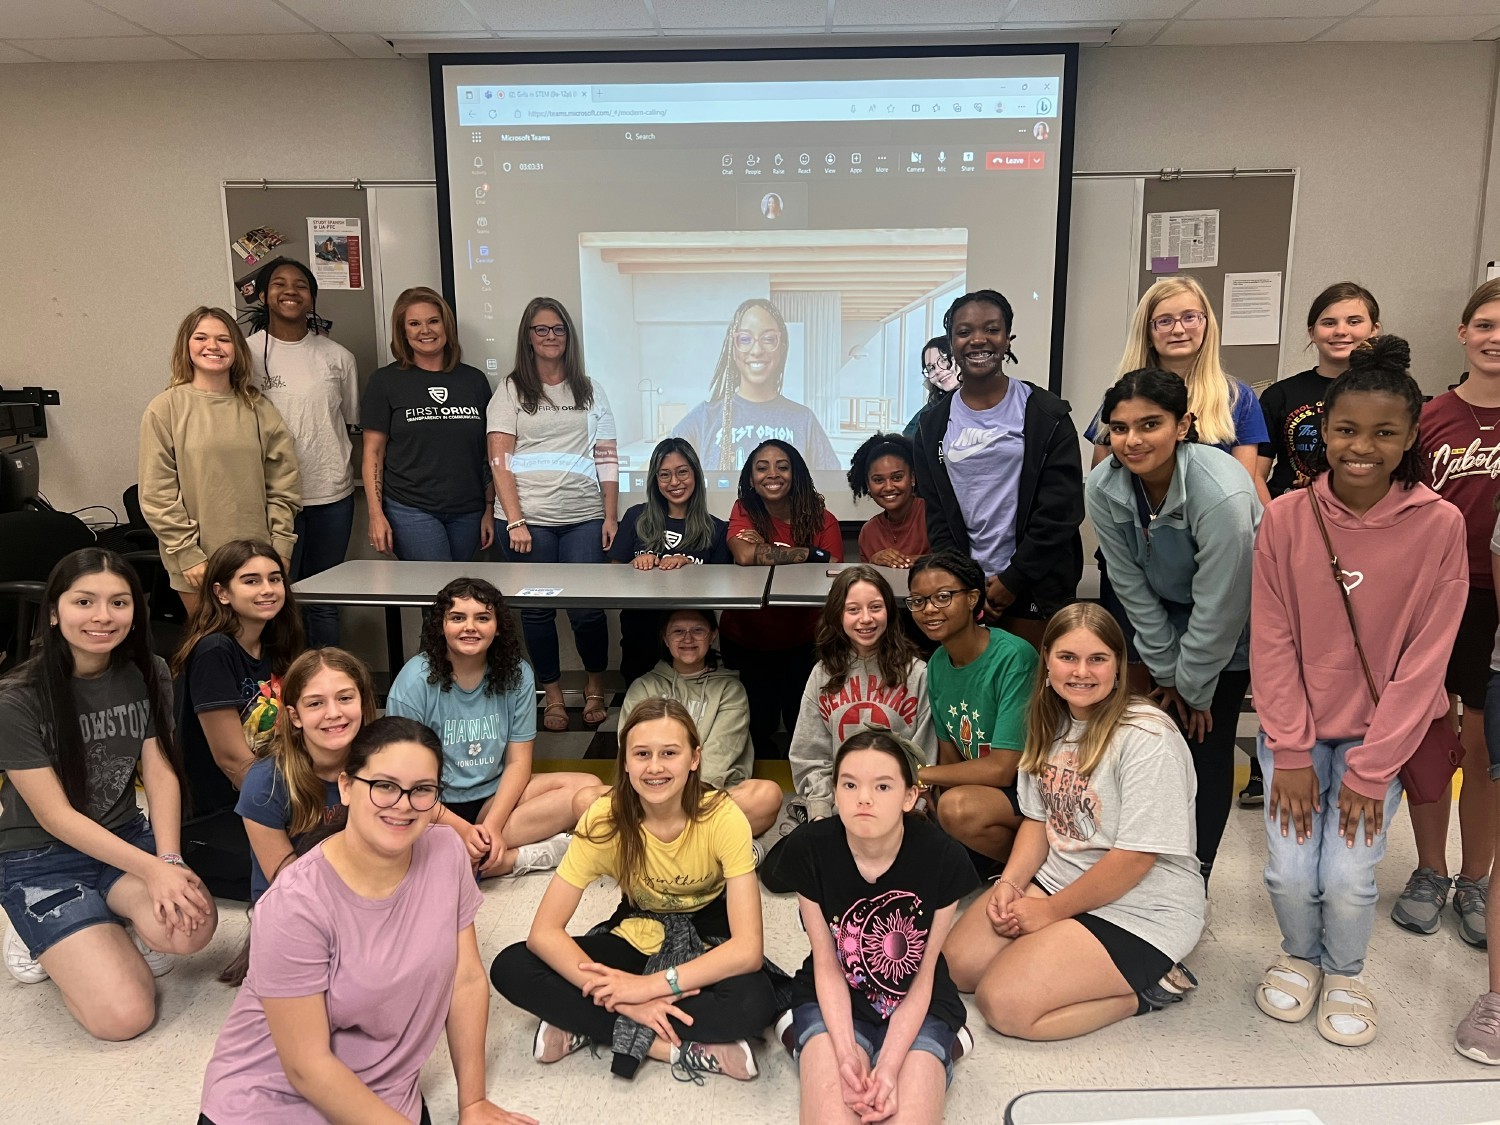 Our Women in Tech ERG planned some fun activities for the Girls in STEM group.  